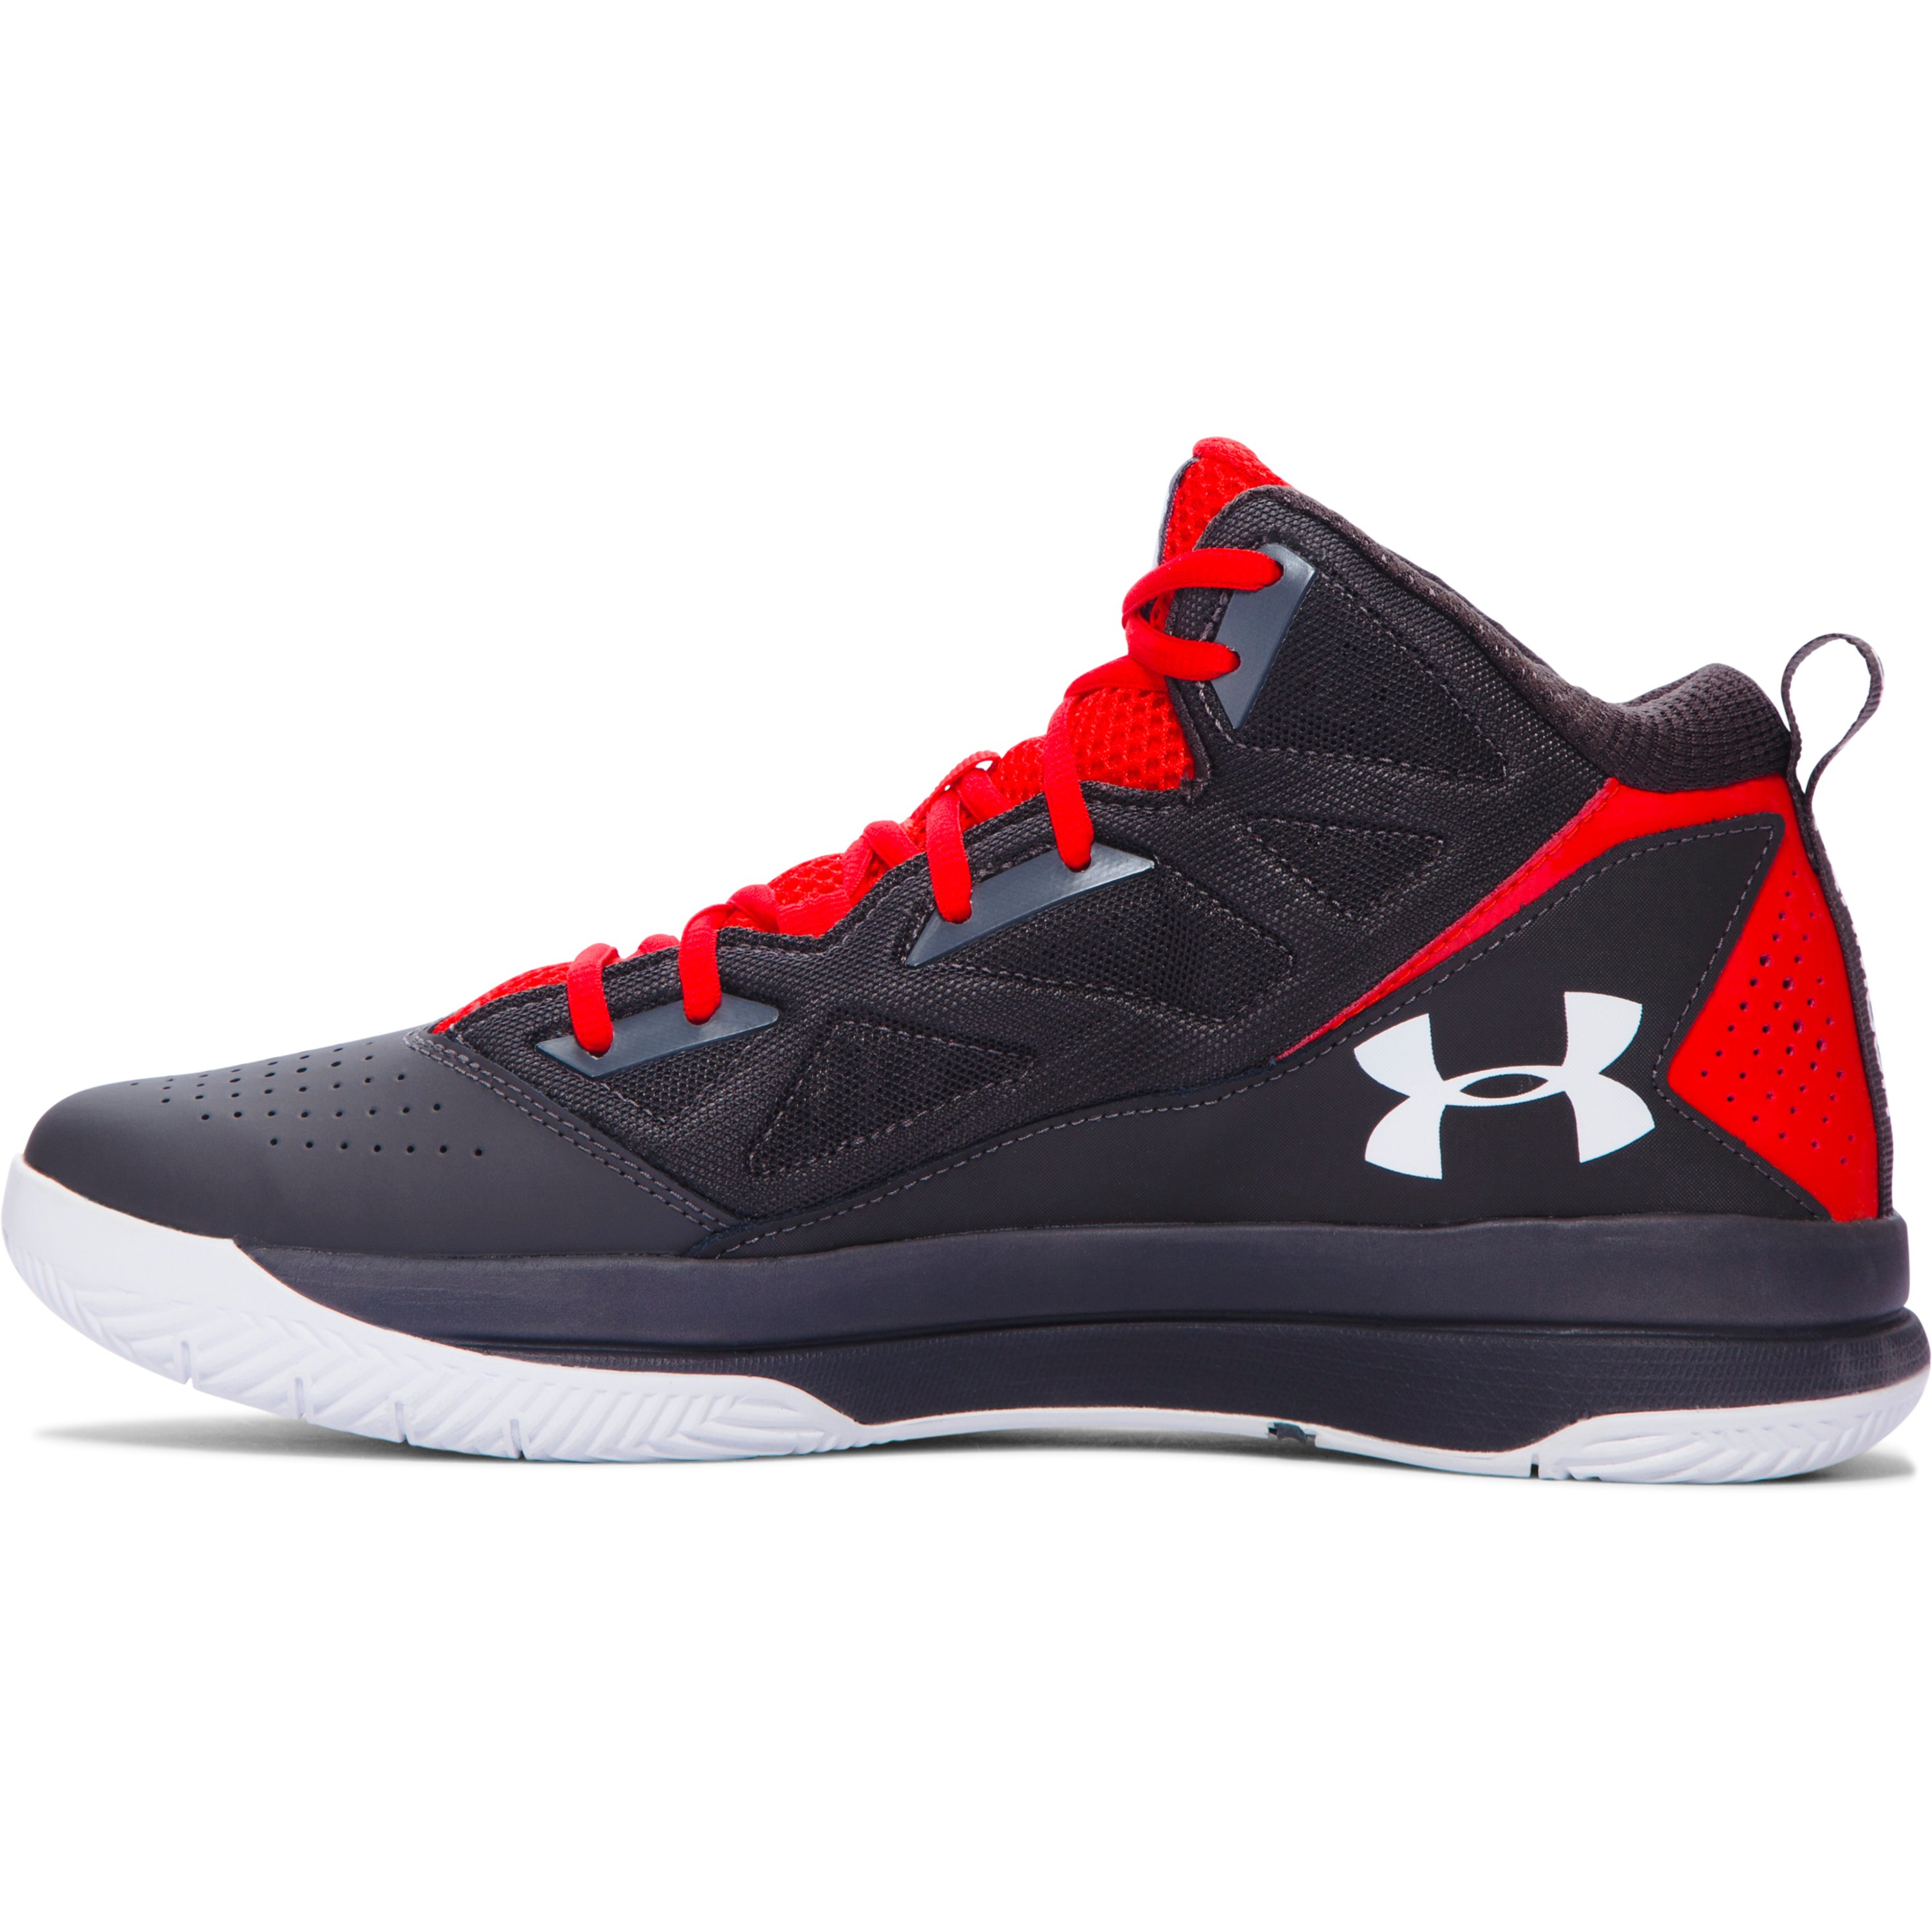 Under Armour Mens UA Jet Mid Basketball Shoe Red Sports Breathable Lightweight